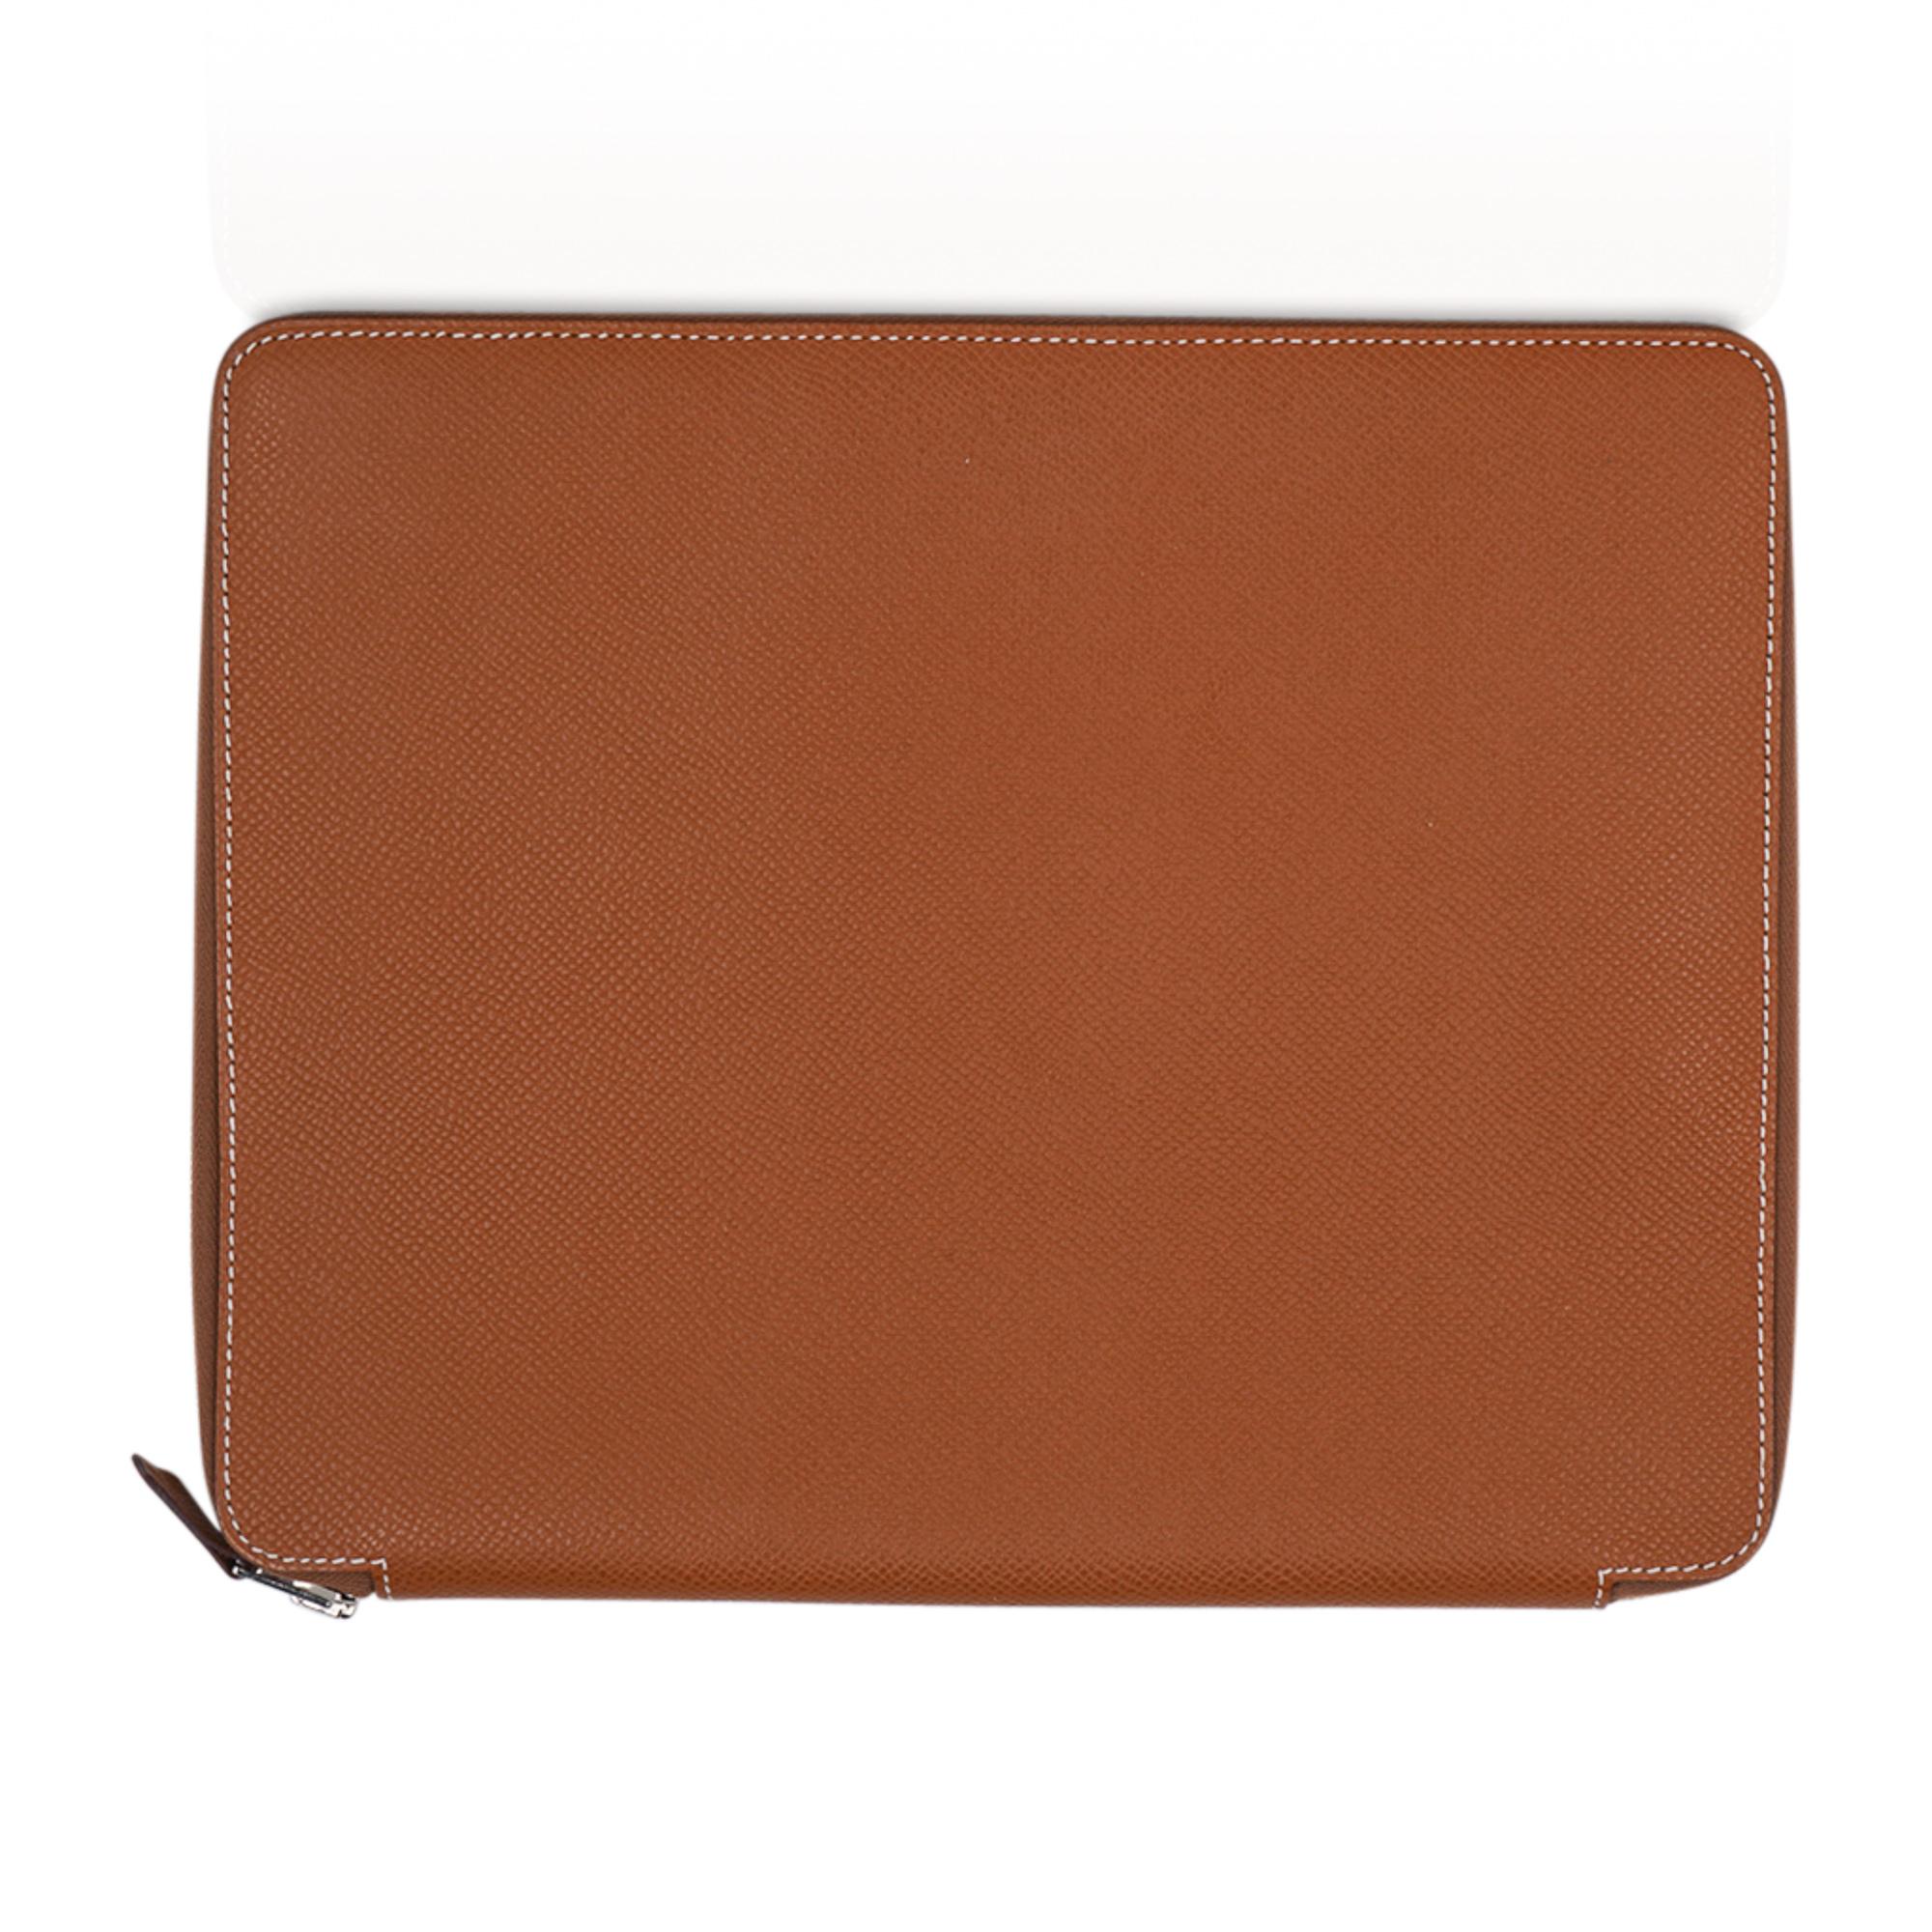 Mightychic offers a guaranteed authentic Hermes Globetrotter Zip Agenda Cover GM featured in Gold.
Sleek clean lines create this timeless chic Hermes agenda.
Epsom leather with bone topstitch.
7 slot pockets for business cards.
2 large side pockets